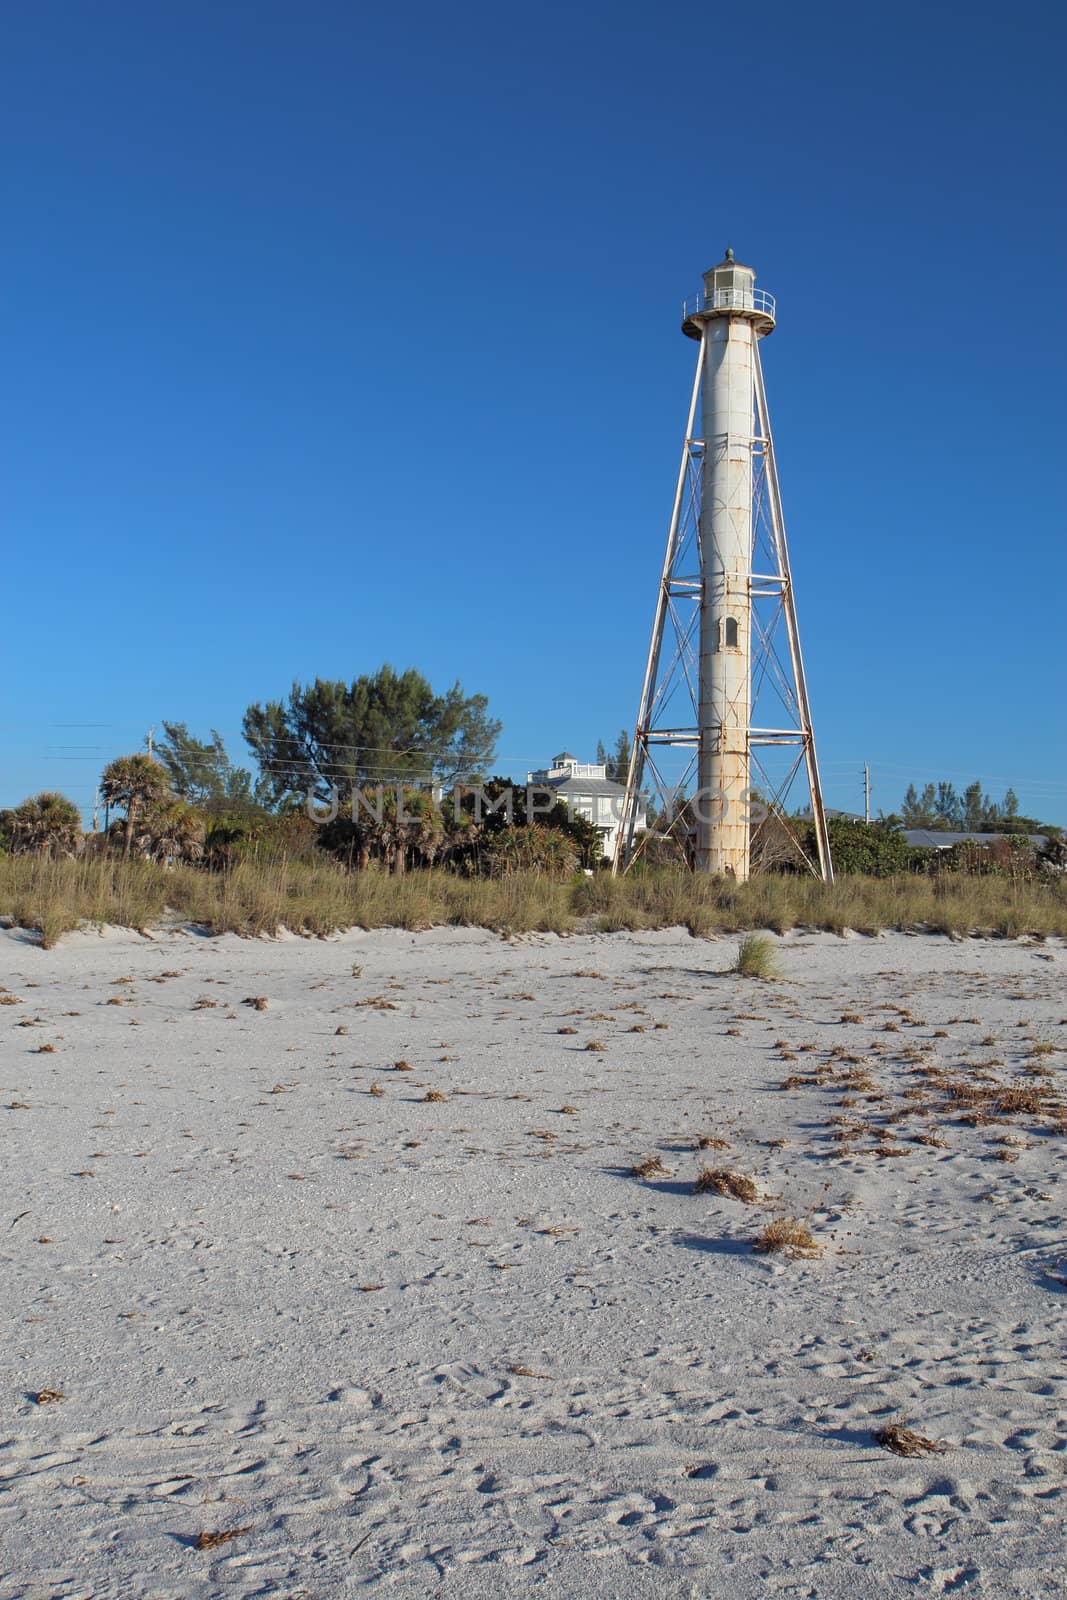 The Gasparilla Island Rear Range Light on Gasparilla Island, Florida viewed from the beach with sea oats (Uniola paniculata) and other plants in the foreground and a clear blue sky vertical